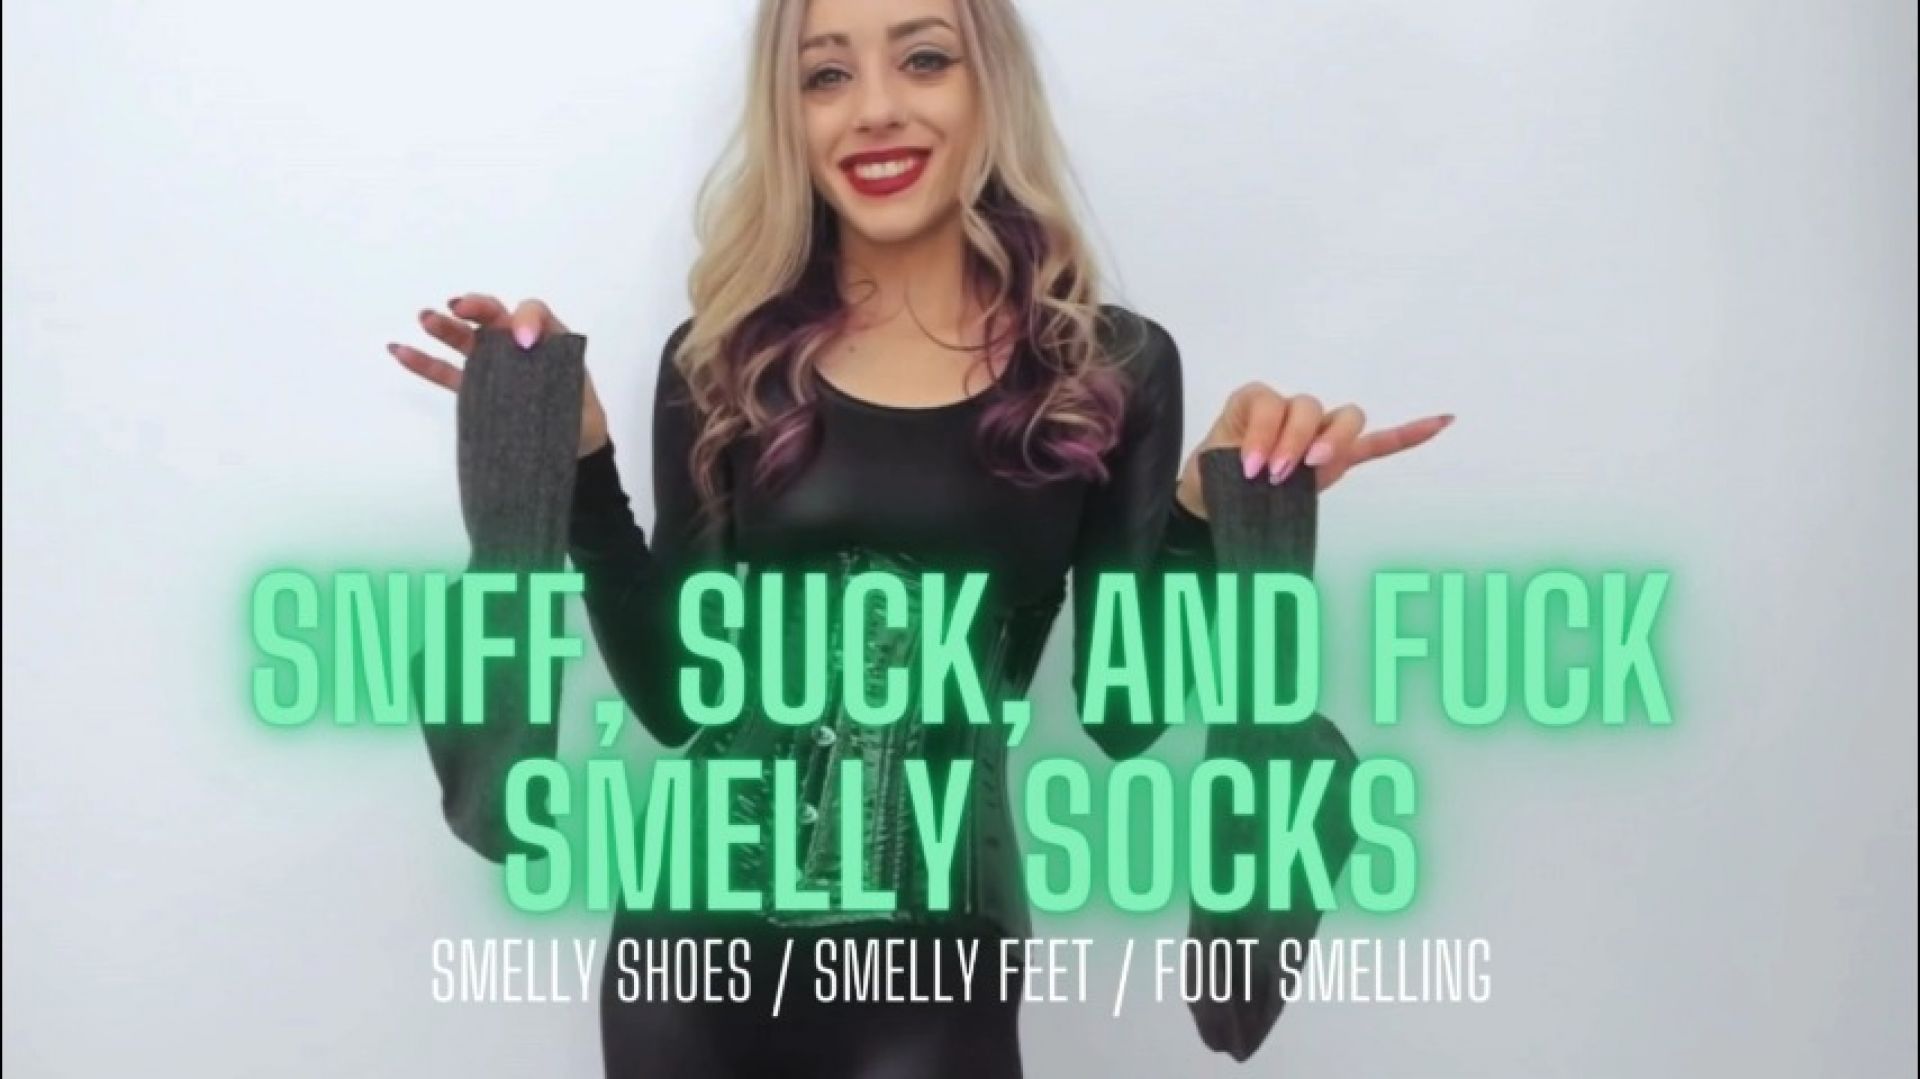 Sniff, Suck, and Fuck Smelly Socks